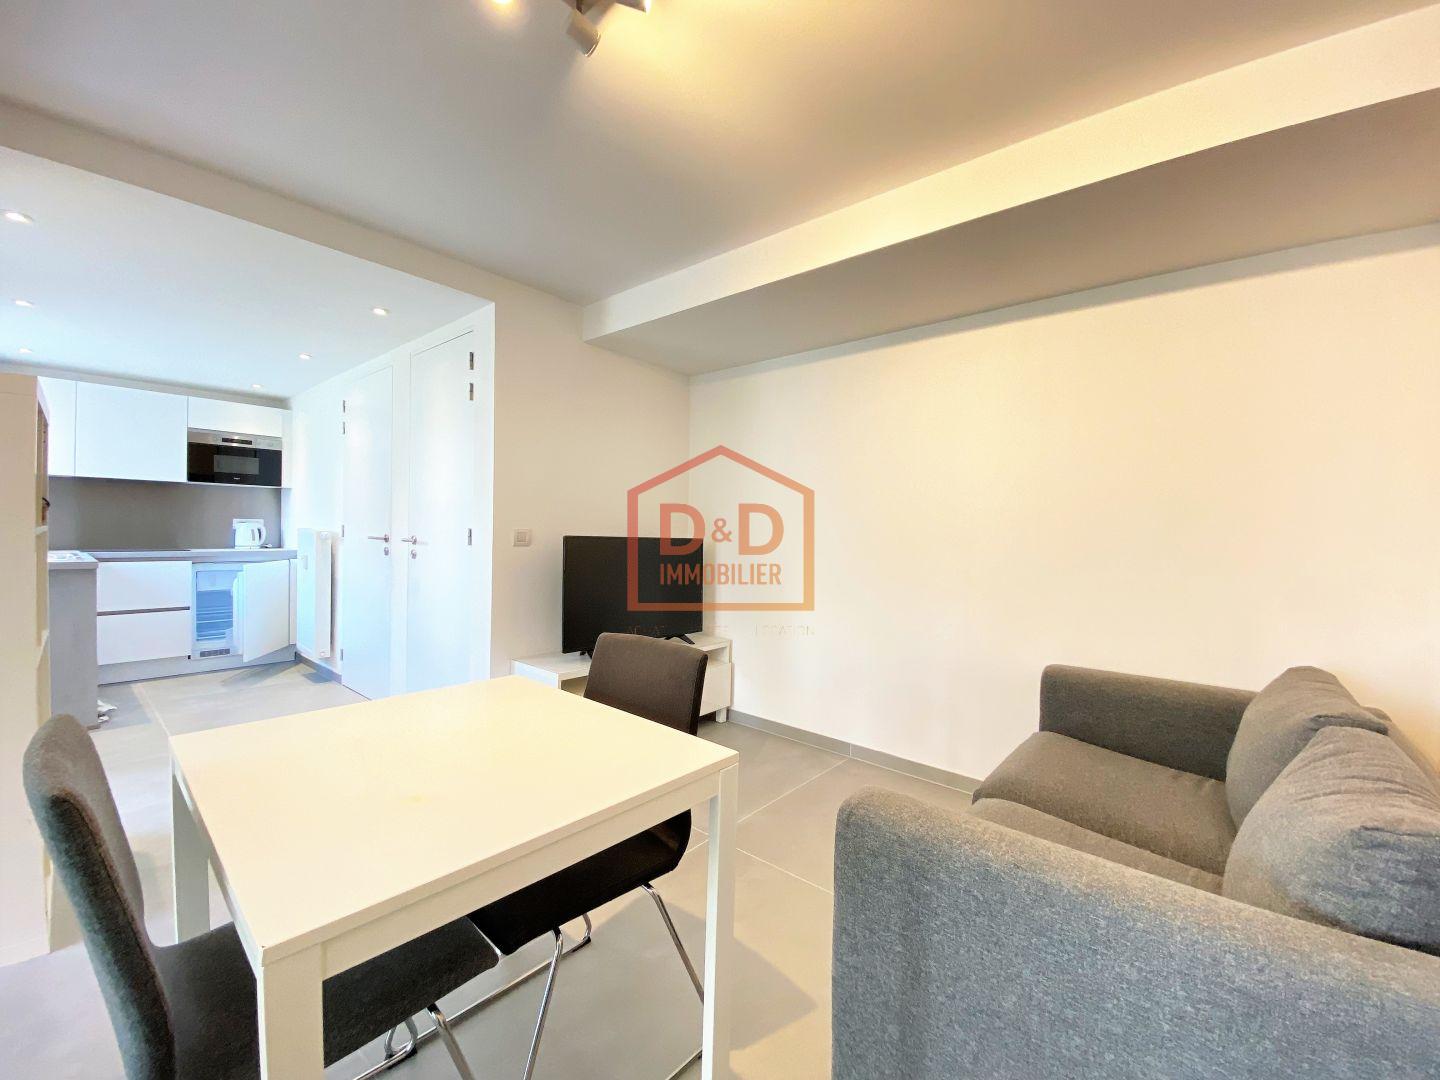 Appartement à Luxembourg-Belair, 33 m², 1 chambre, 1 500 €/mois